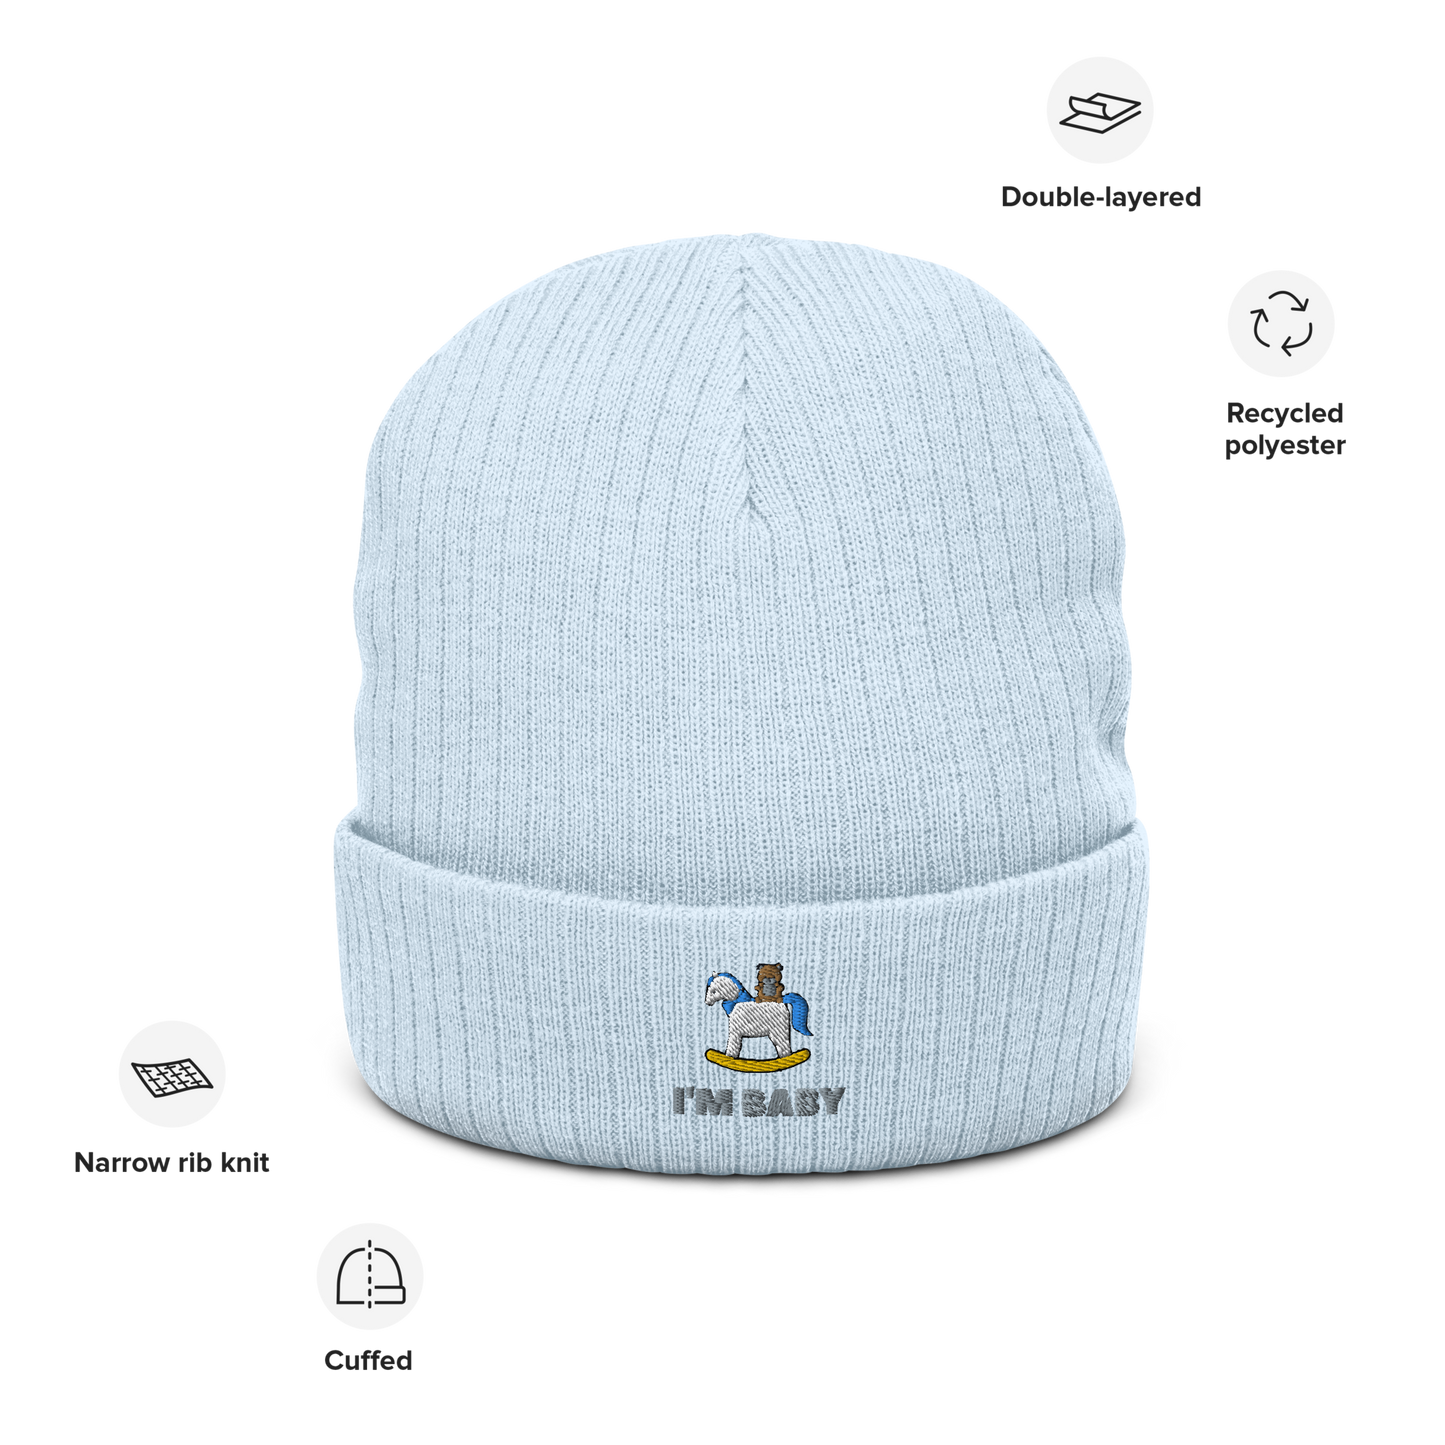 I'm Baby ABDL Ribbed Knit Embroidered Beanie